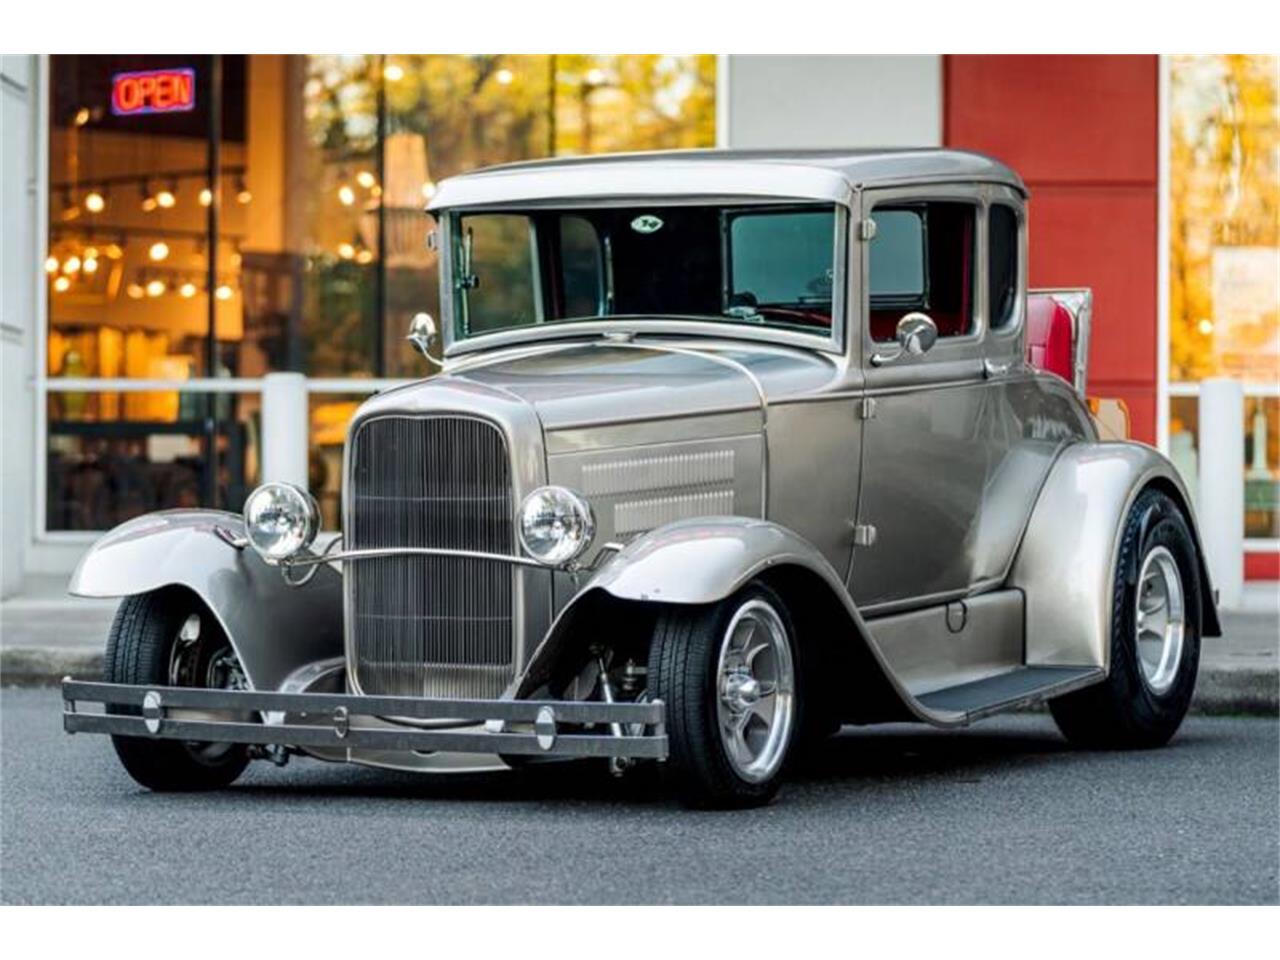 For Sale: 1930 Ford Model A in Portland, Oregon for sale in Portland, OR